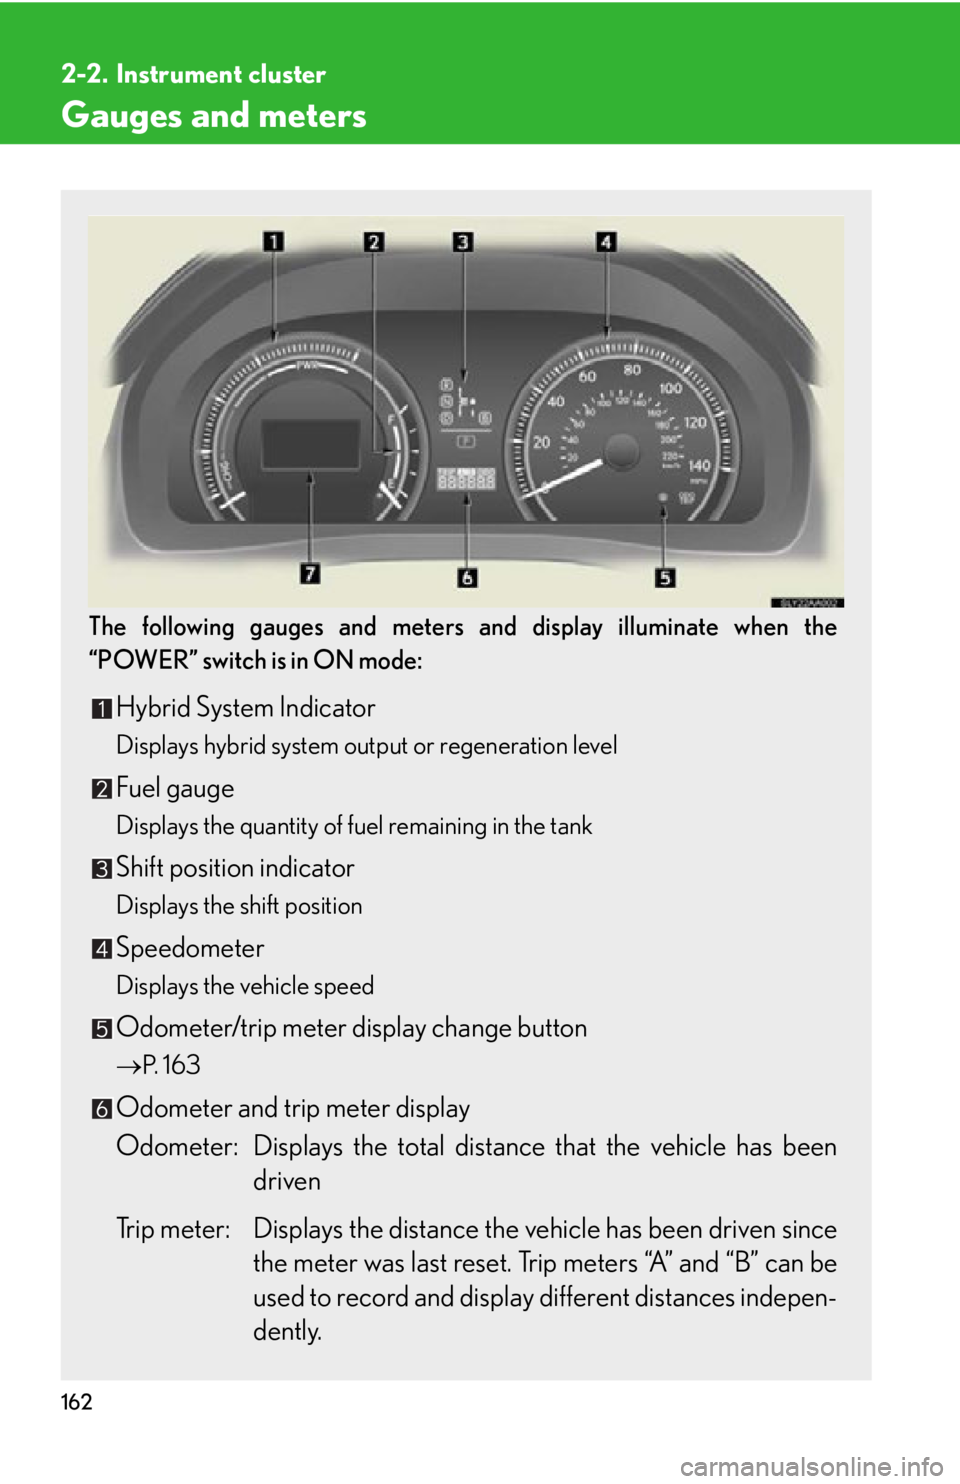 Lexus HS250h 2010  Setup / LEXUS 2010 HS250H OWNERS MANUAL (OM75006U) 162
2-2. Instrument cluster
Gauges and meters
The following gauges and meters and display illuminate when the 
“POWER” switch is in ON mode:
Hybrid System Indicator
Displays hybrid system output o